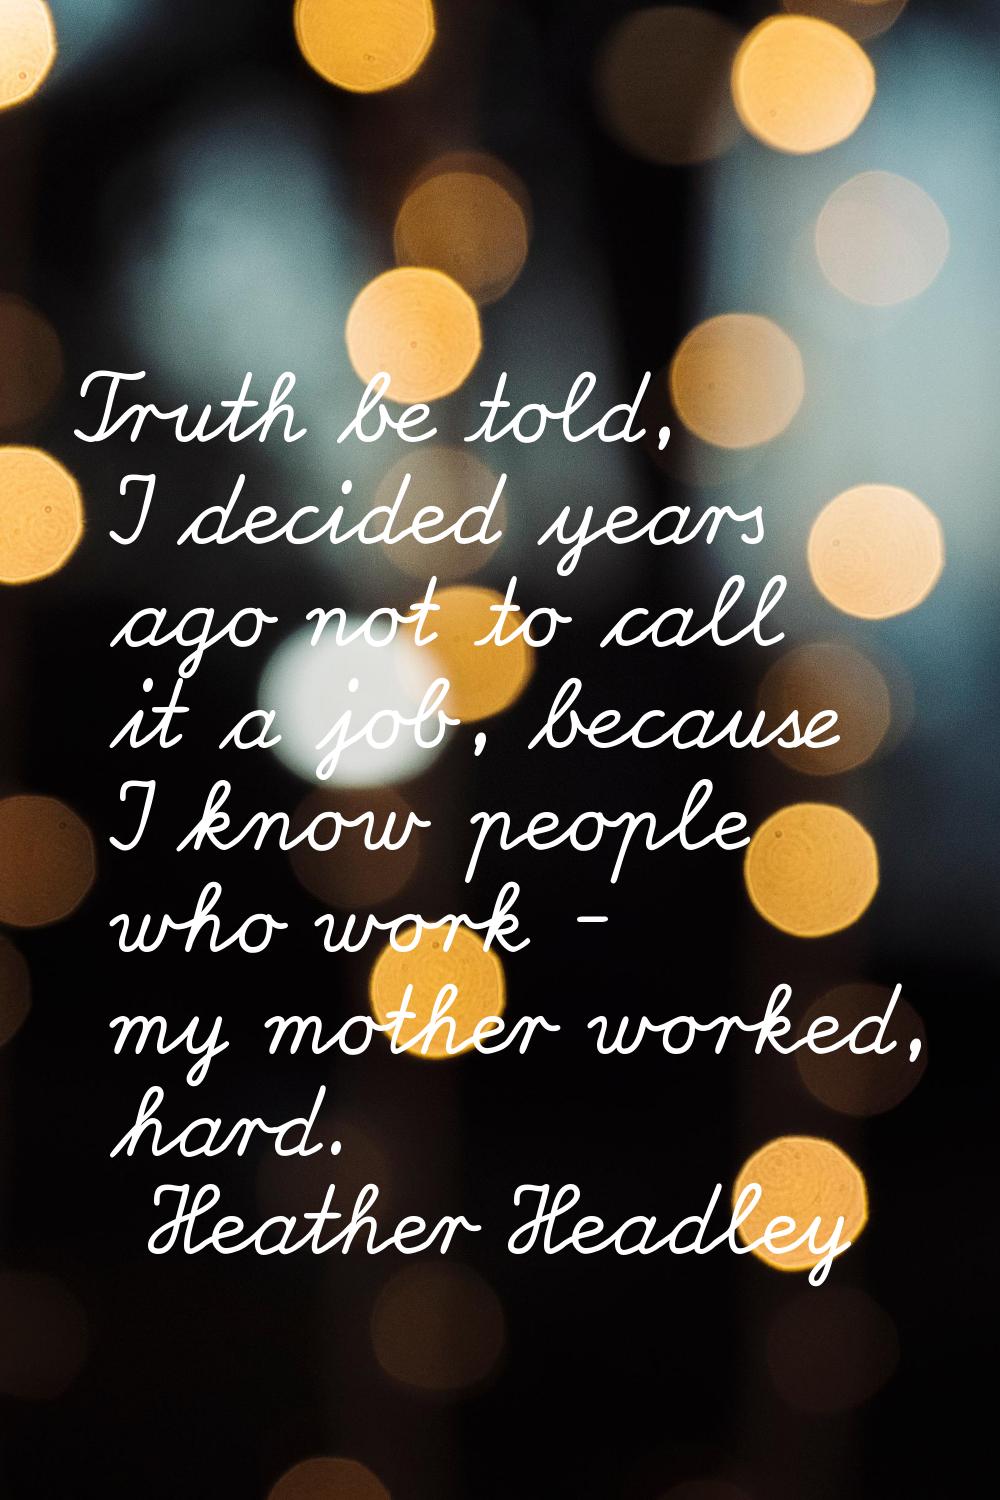 Truth be told, I decided years ago not to call it a job, because I know people who work - my mother